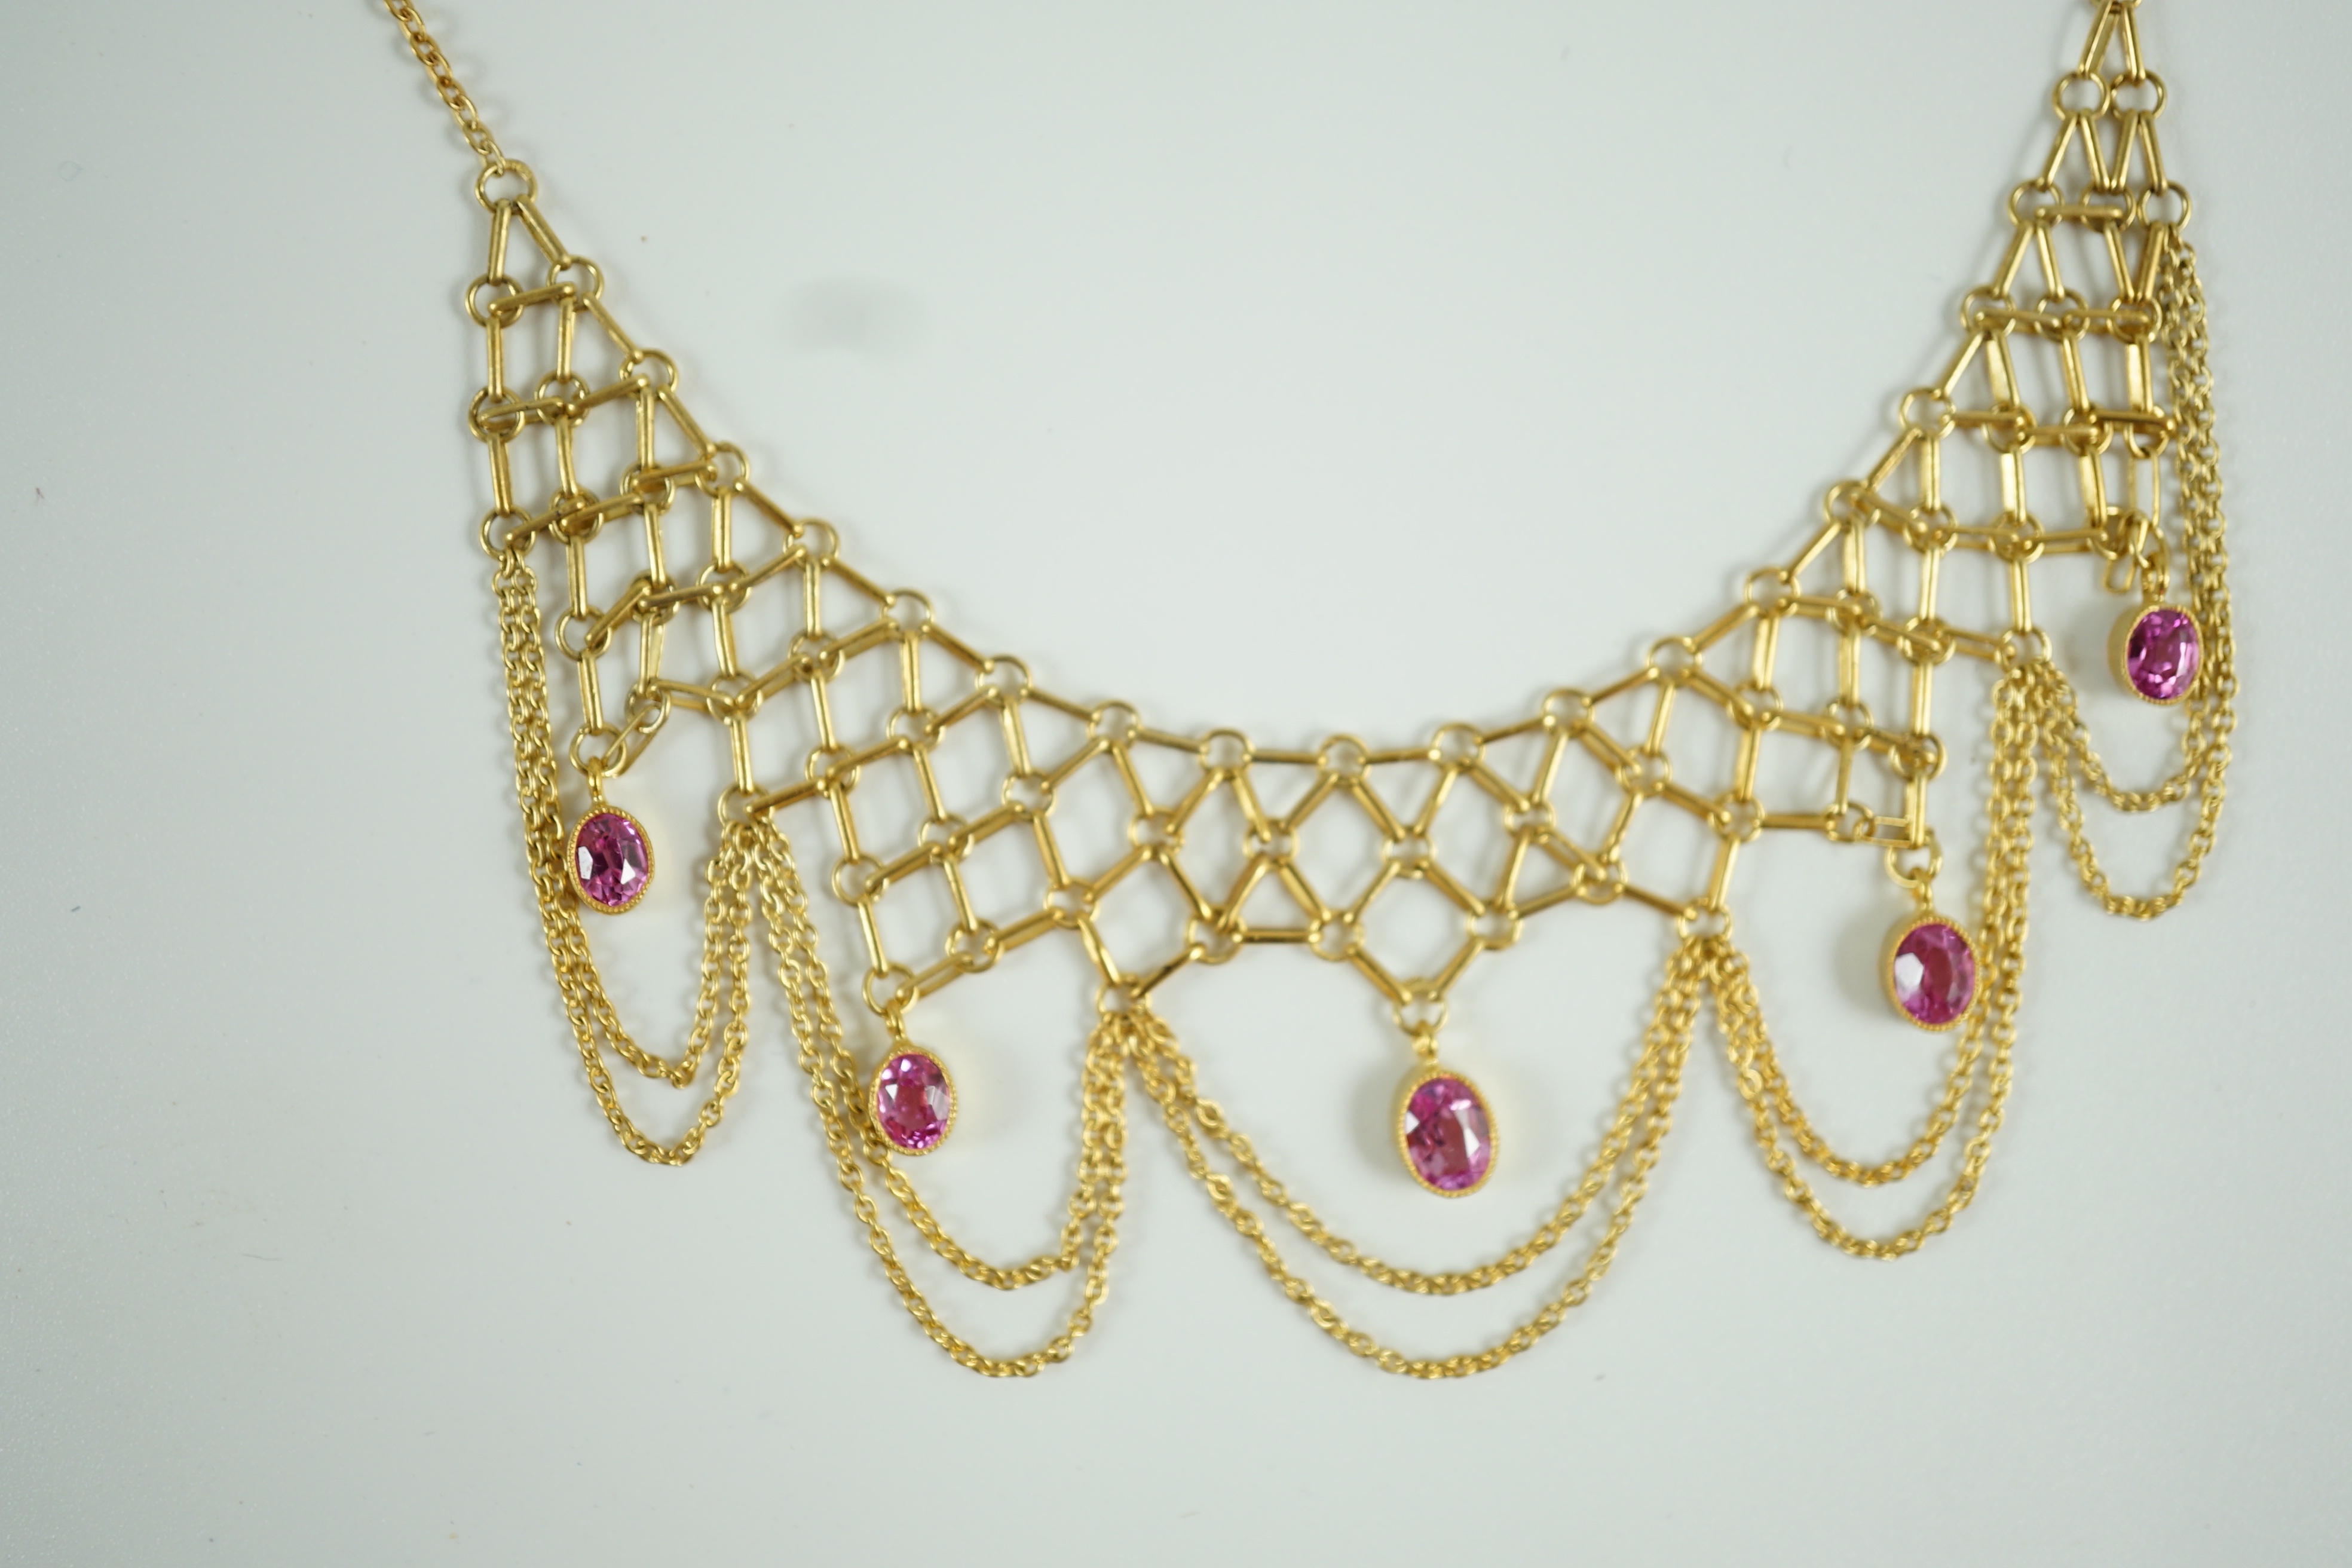 A 20th century 14k gold and five stone oval cut pink topaz set drop fringe necklace